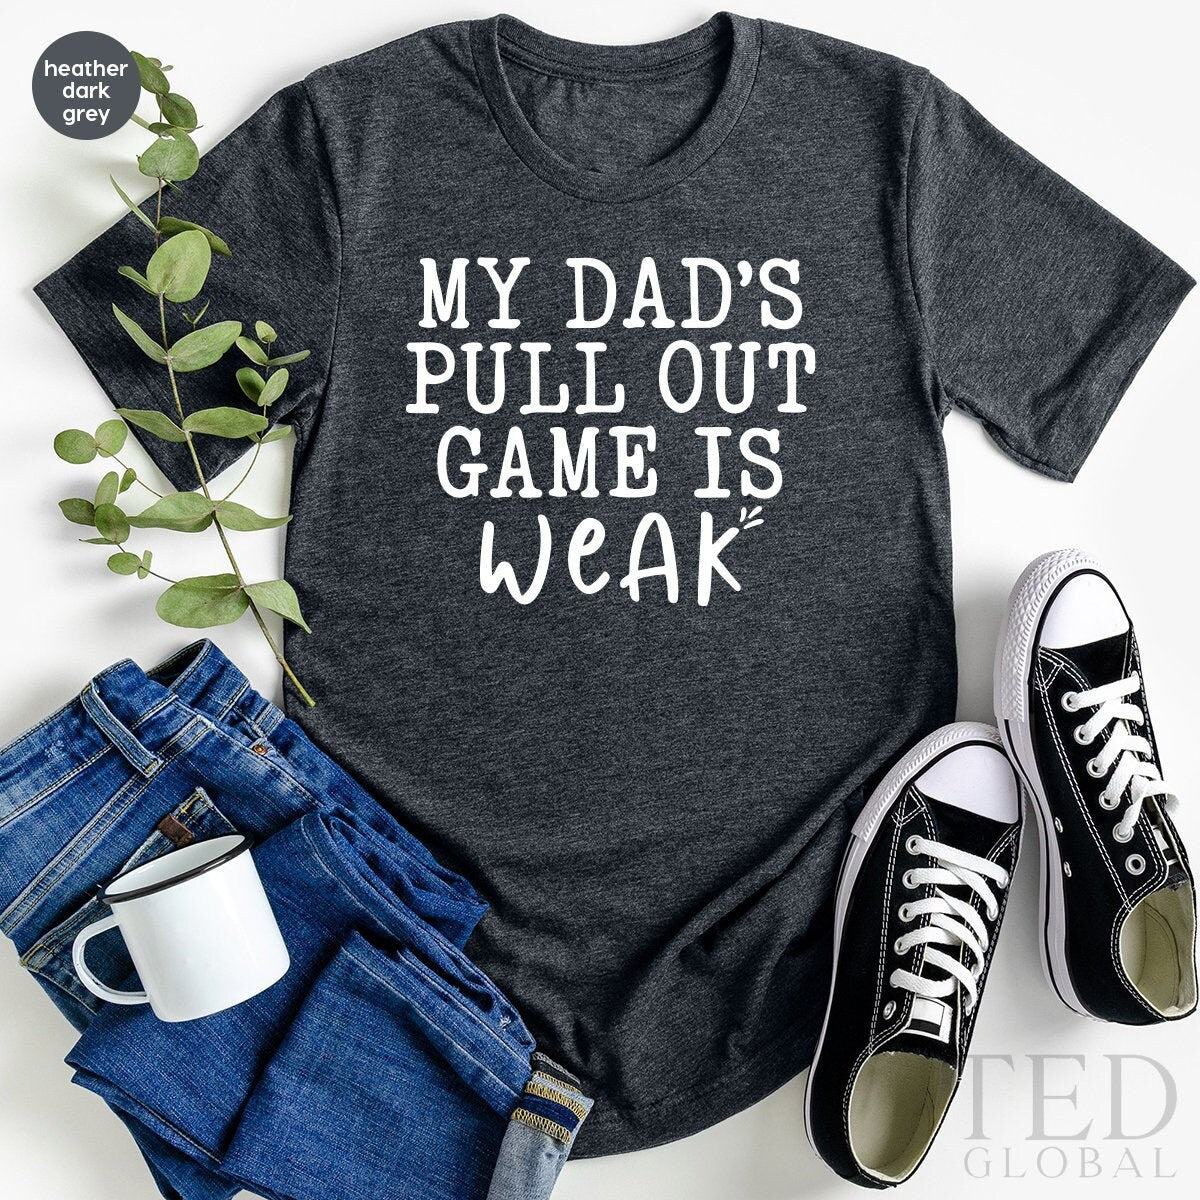 Cute Baby T-Shirt, Funny Matching Shirt, Son and Dad Shirt, Gamer Daddy Tshirt, My Dads Pull Out Game Is Weak Shirt, Fathers Day T Shirt